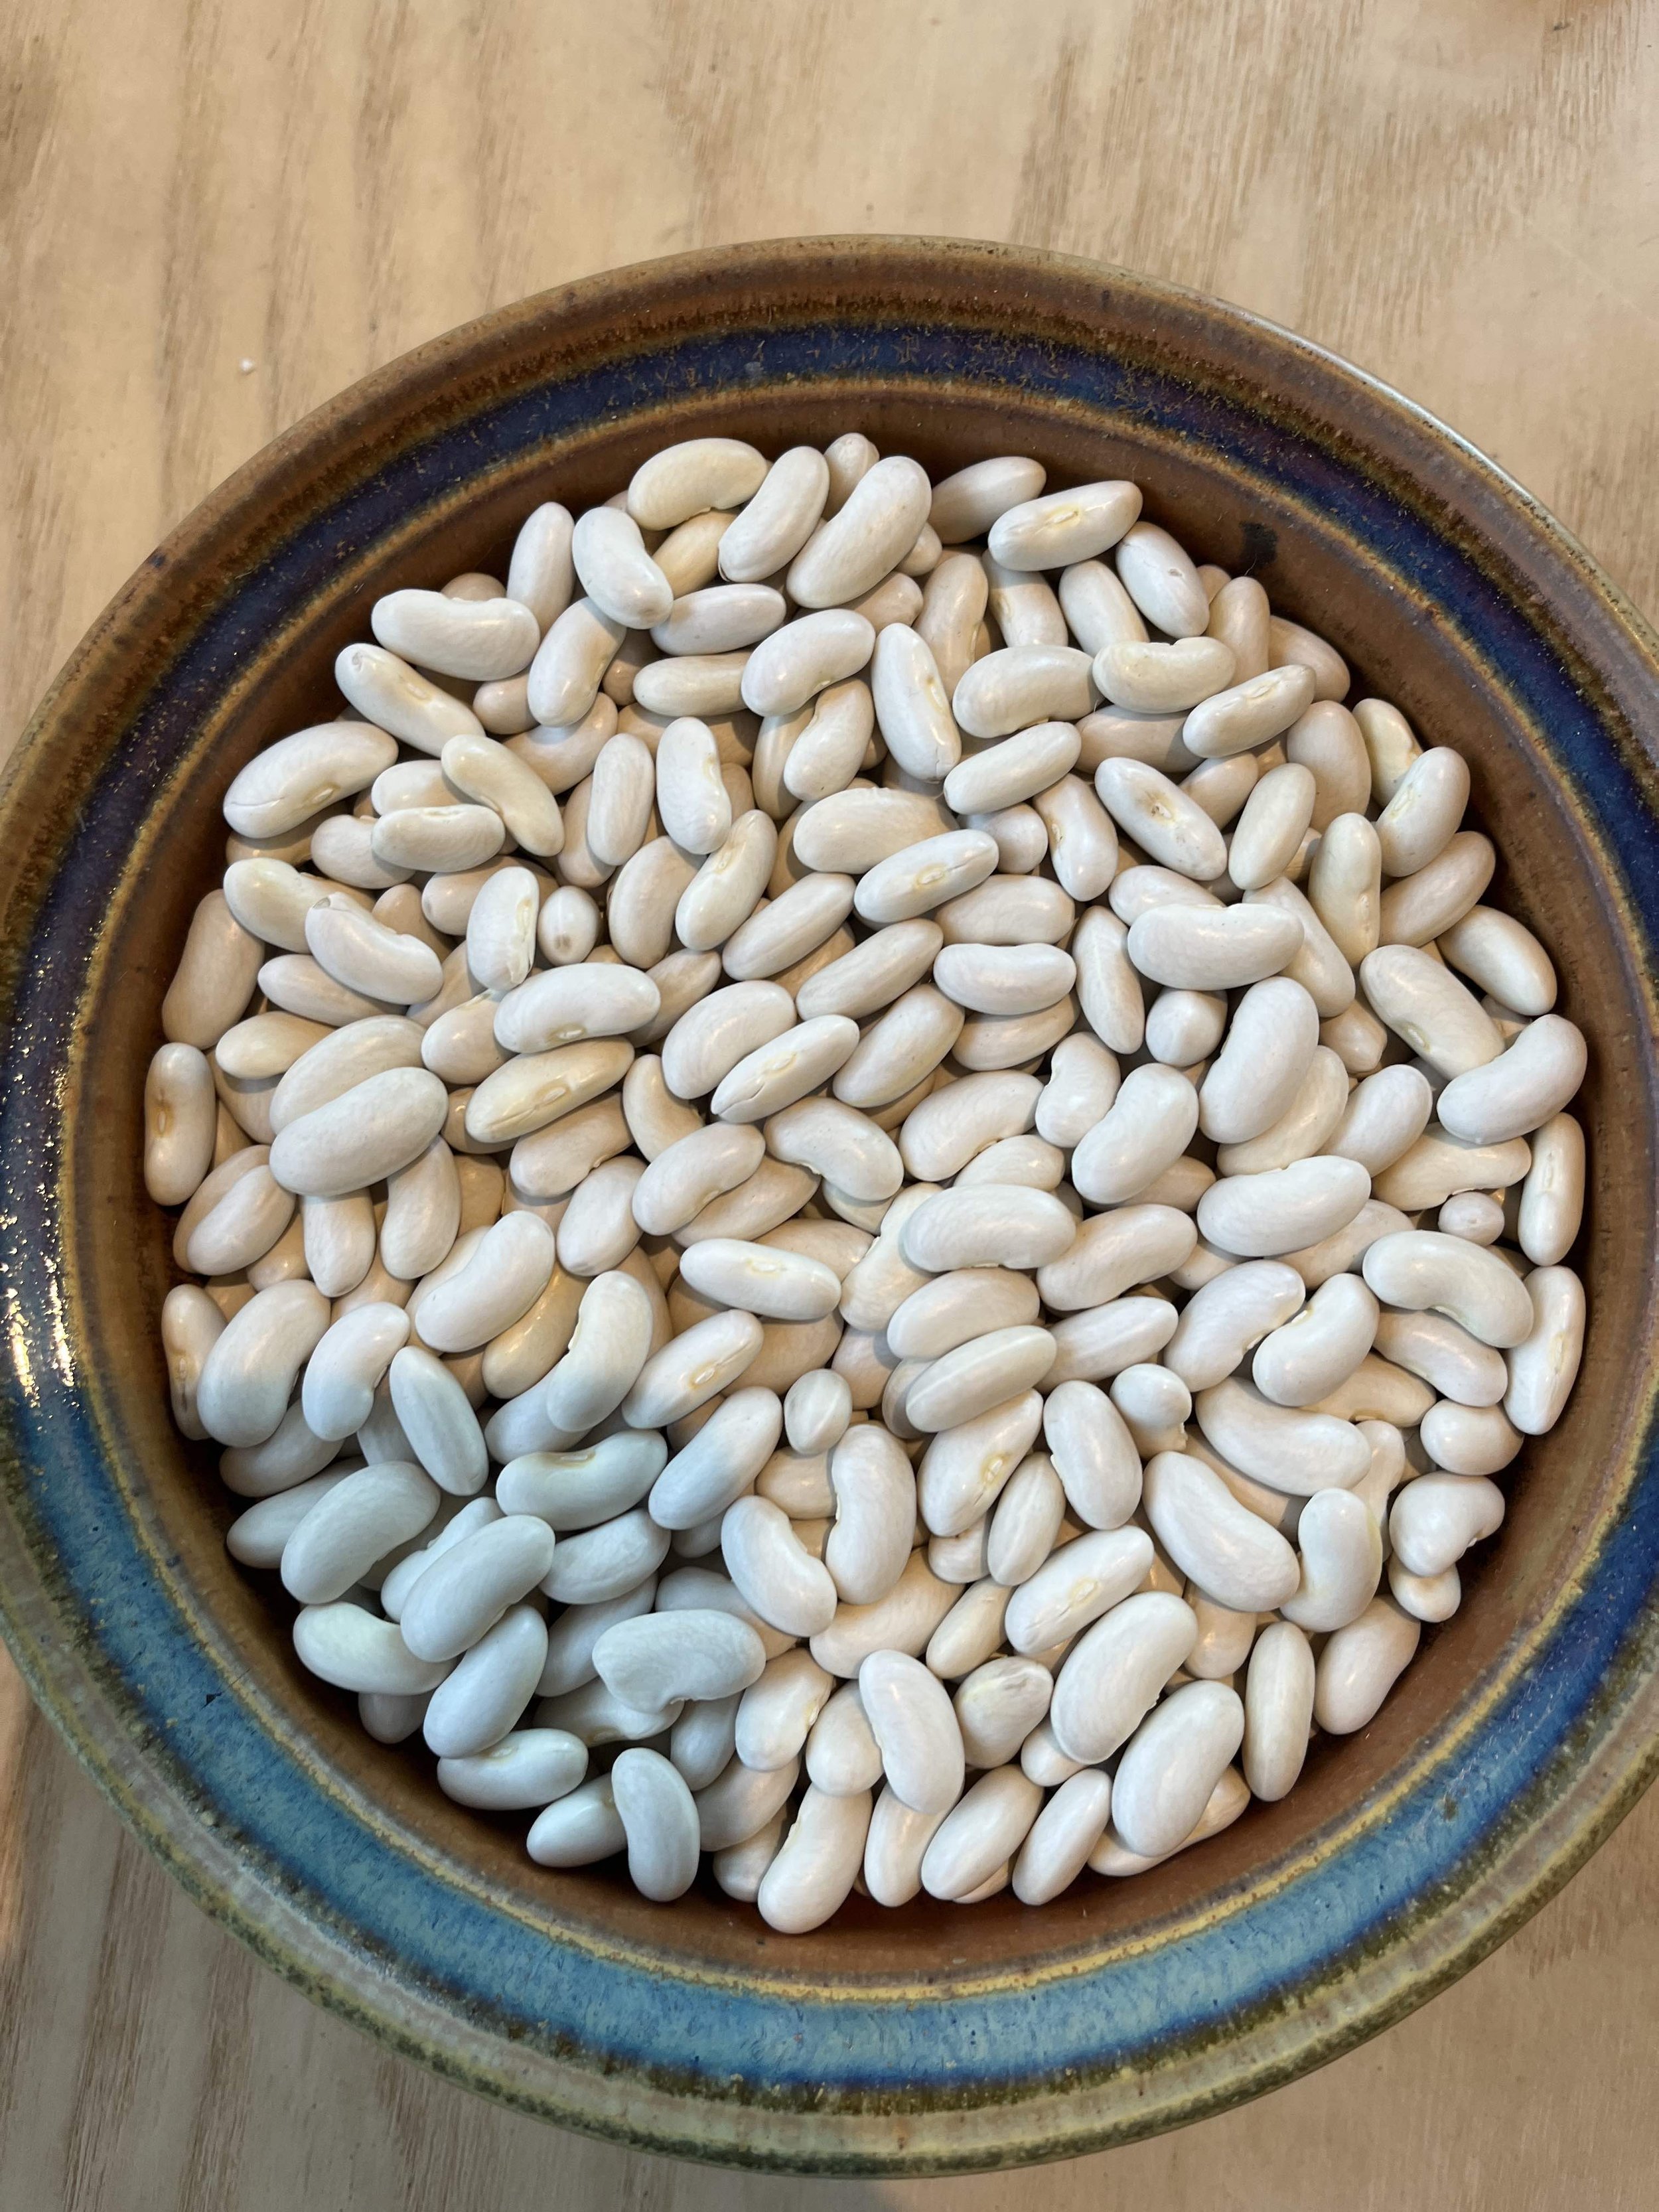 Silver Cloud // An unusual cannellini variety that is particularly large-seeded and shiny. This is one of our biggest beans and is just the thing for all your bold white bean needs. Firm textured, skin thinner than a red kidney but still holds shape